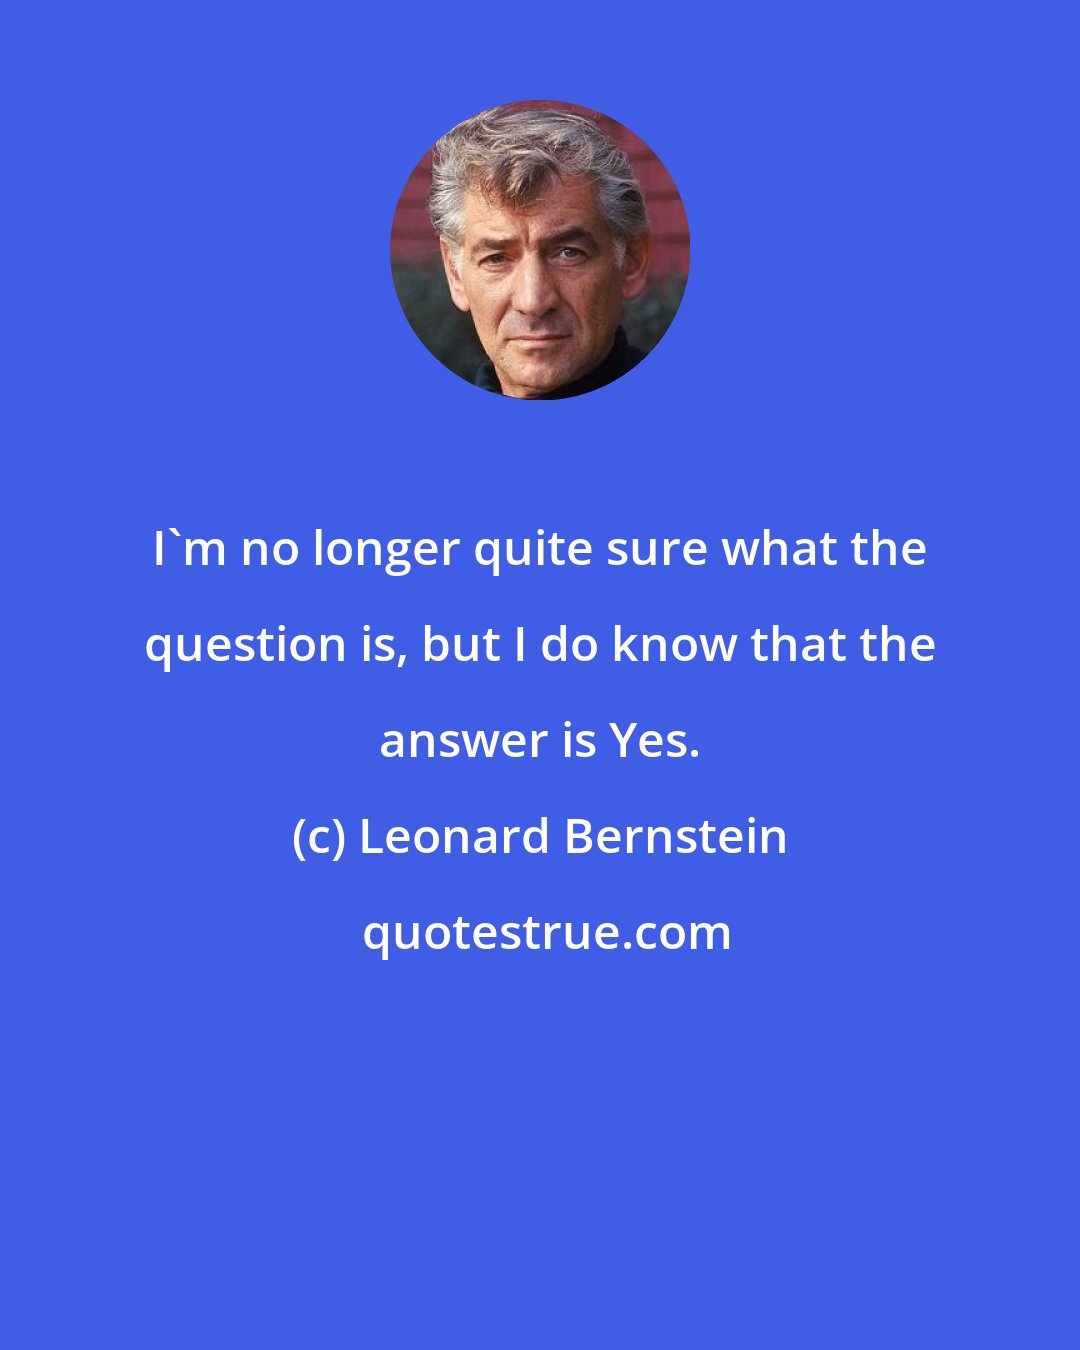 Leonard Bernstein: I'm no longer quite sure what the question is, but I do know that the answer is Yes.